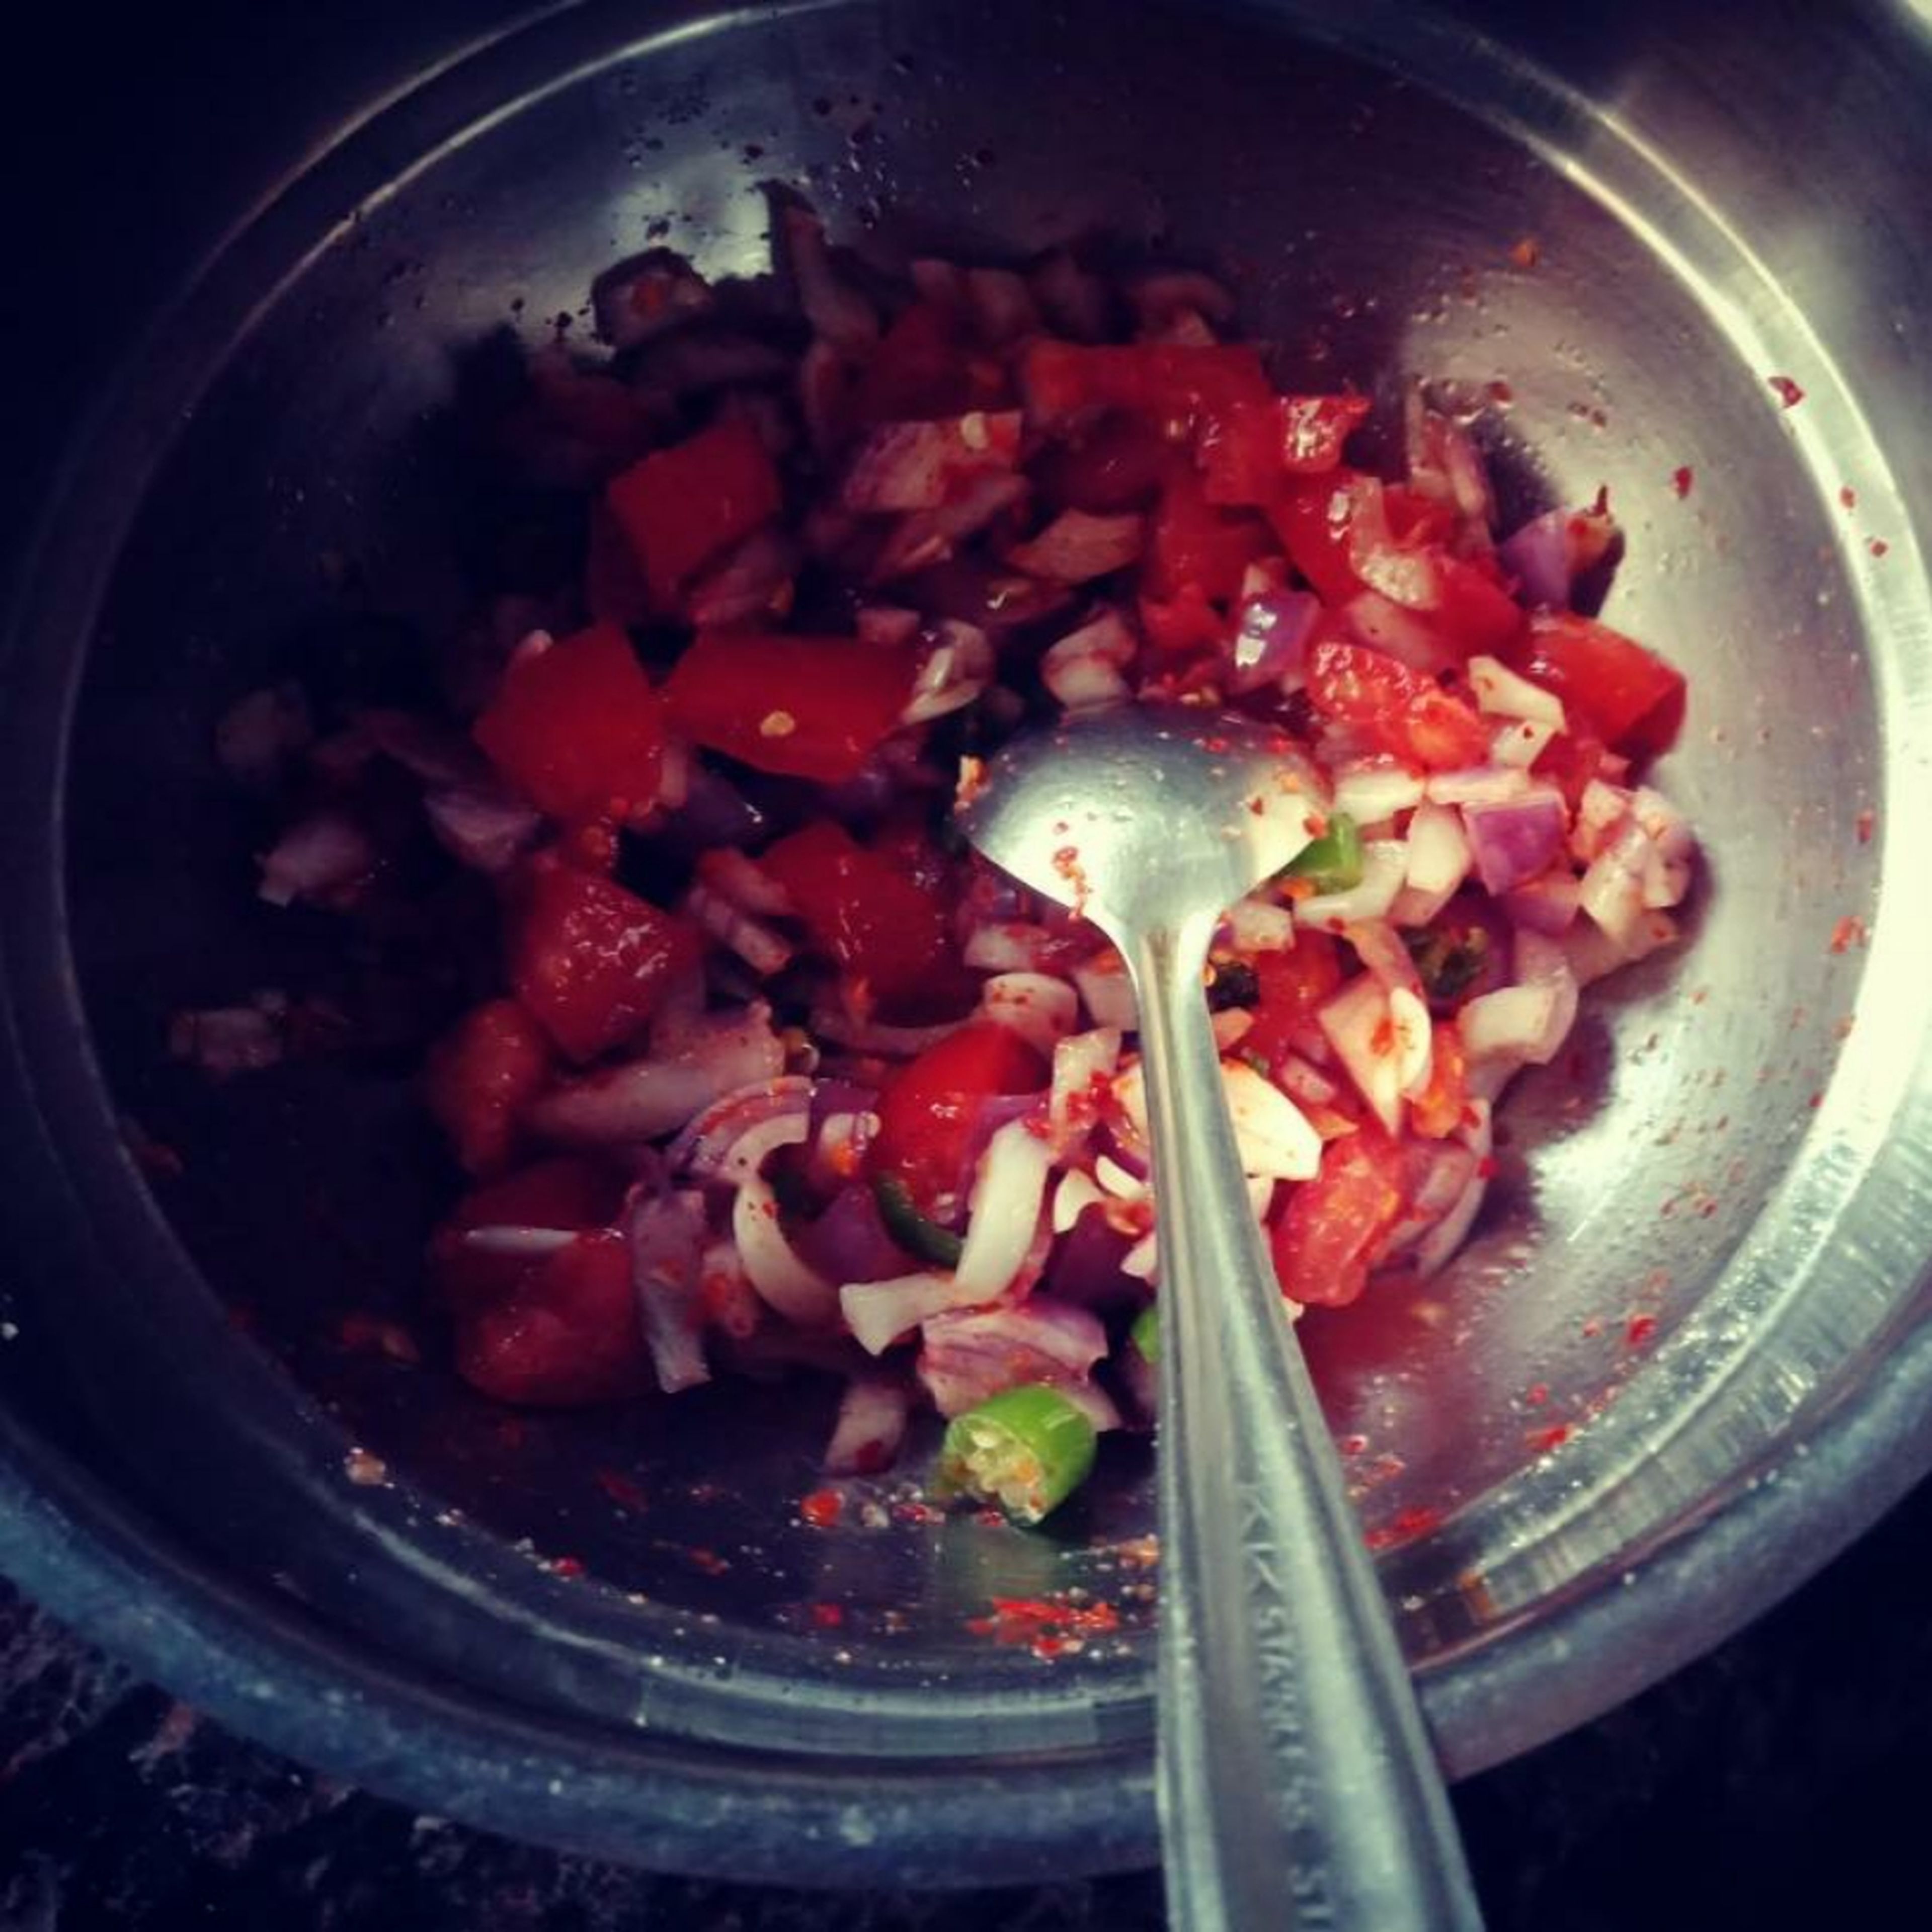 Cut onions, tomatoes,green chilli in thin pieces and mix all dry ingredients.